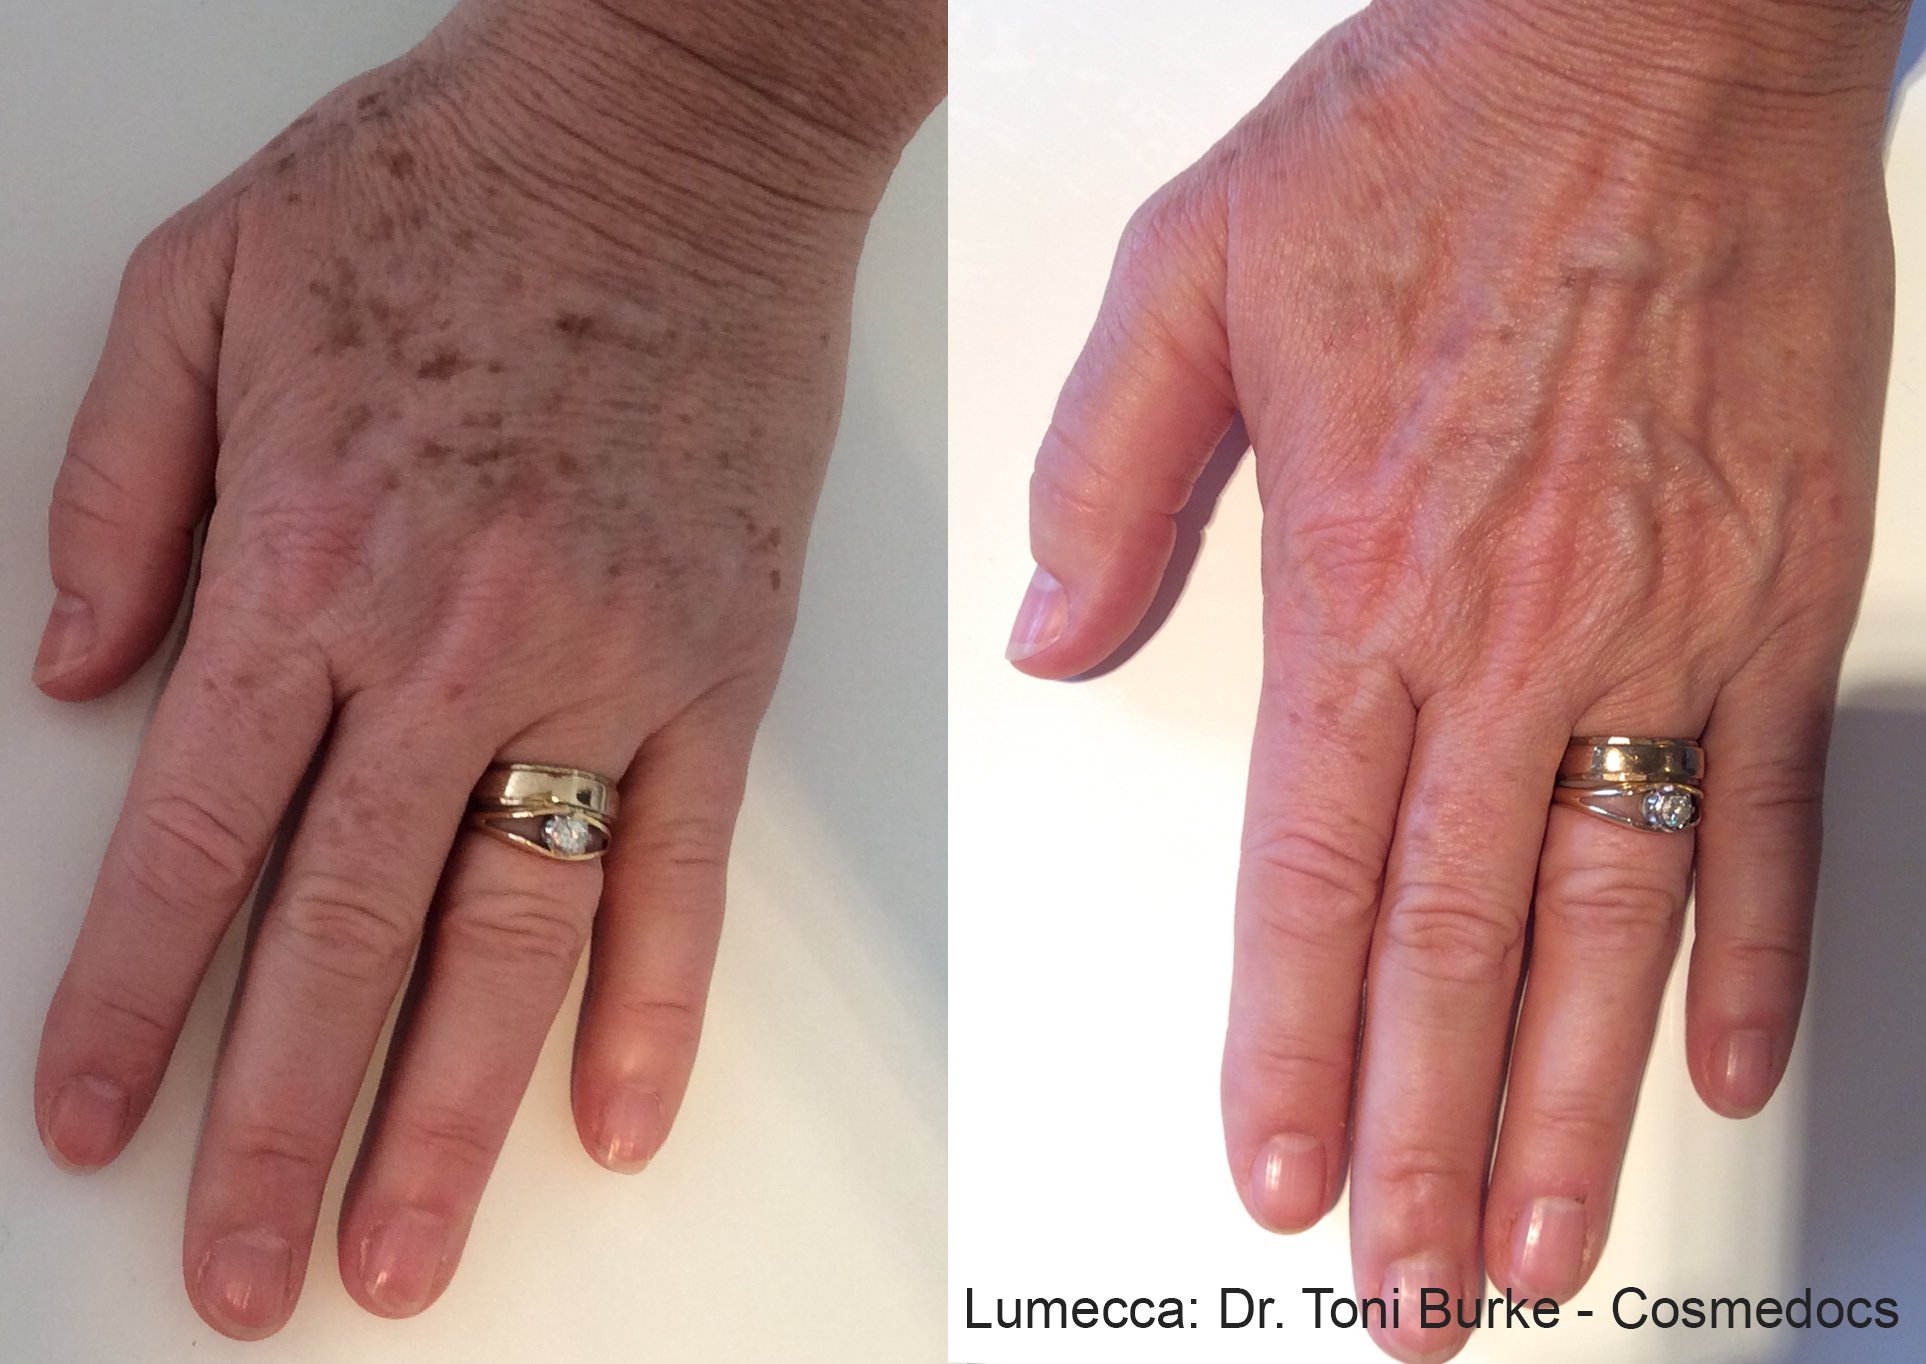 lumecca-before-after-dr-toni-burke-cosmedocs-preview-1.jpg